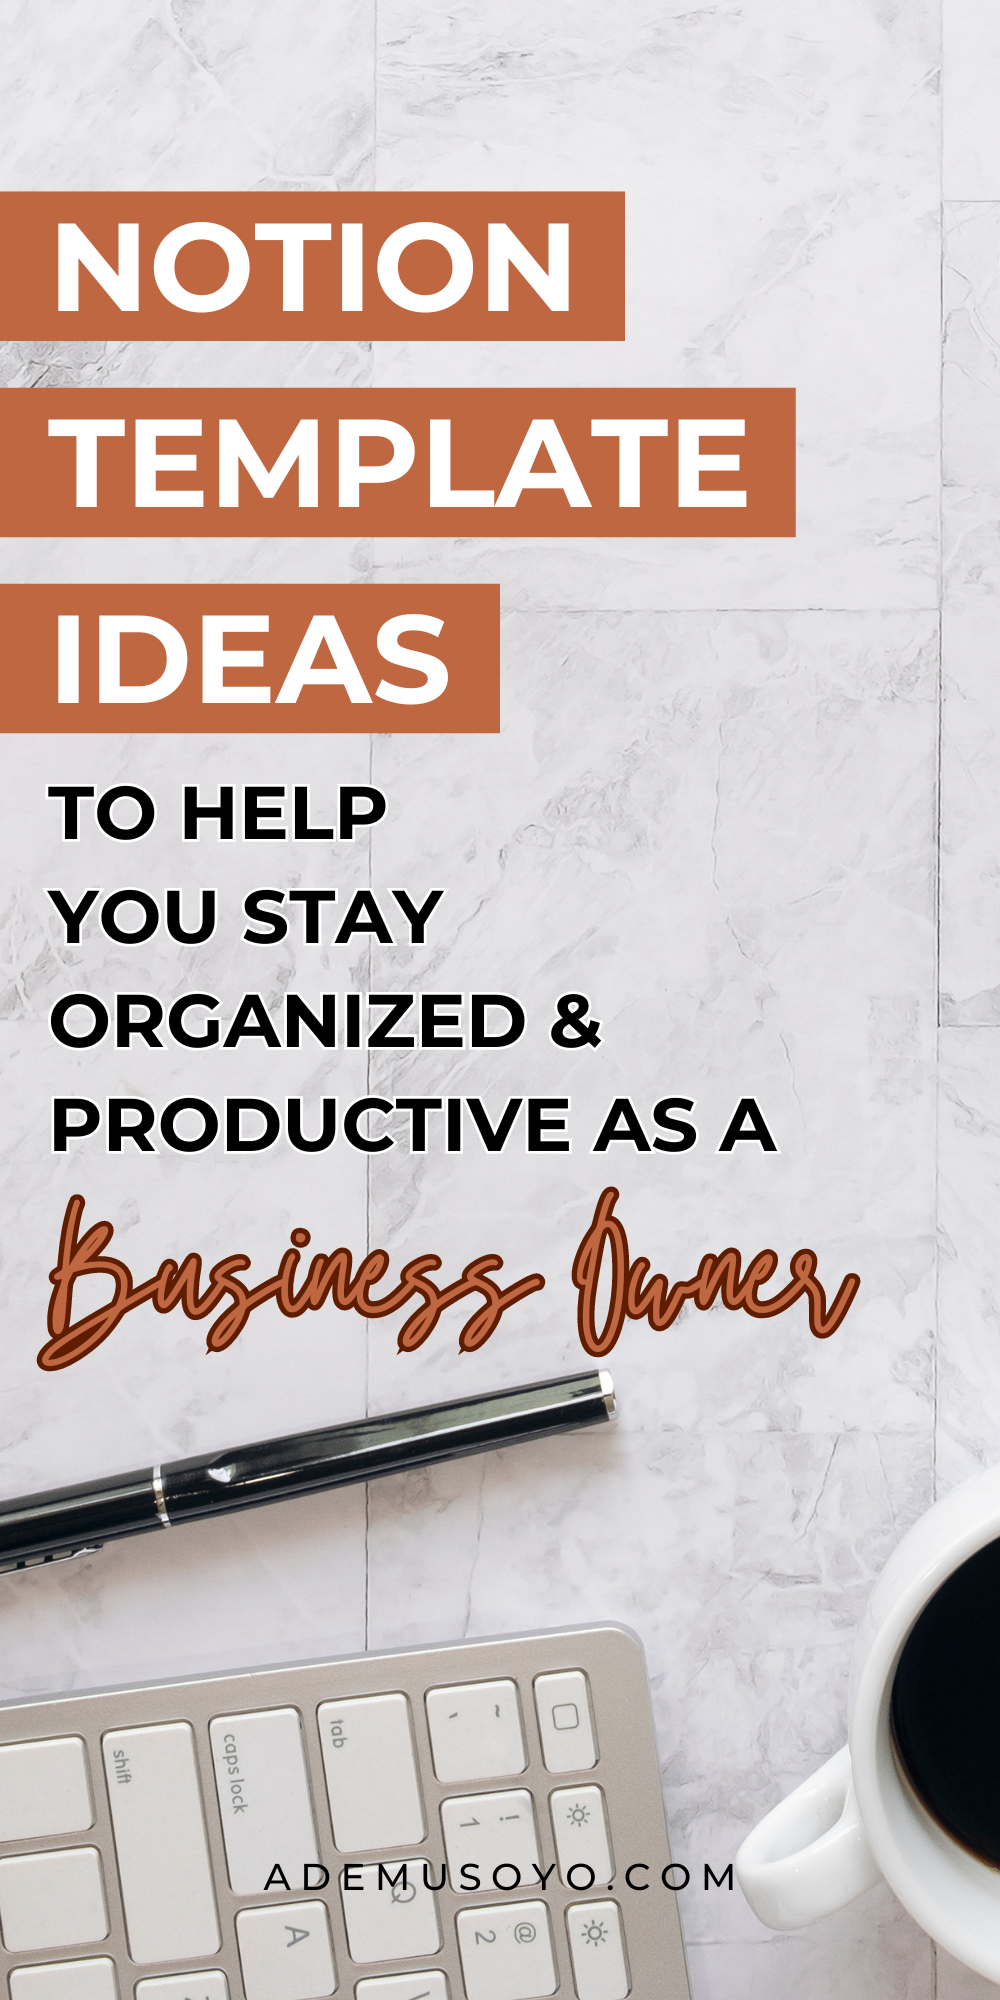 blog cover image with a text overlay notion template ideas to boost productivity